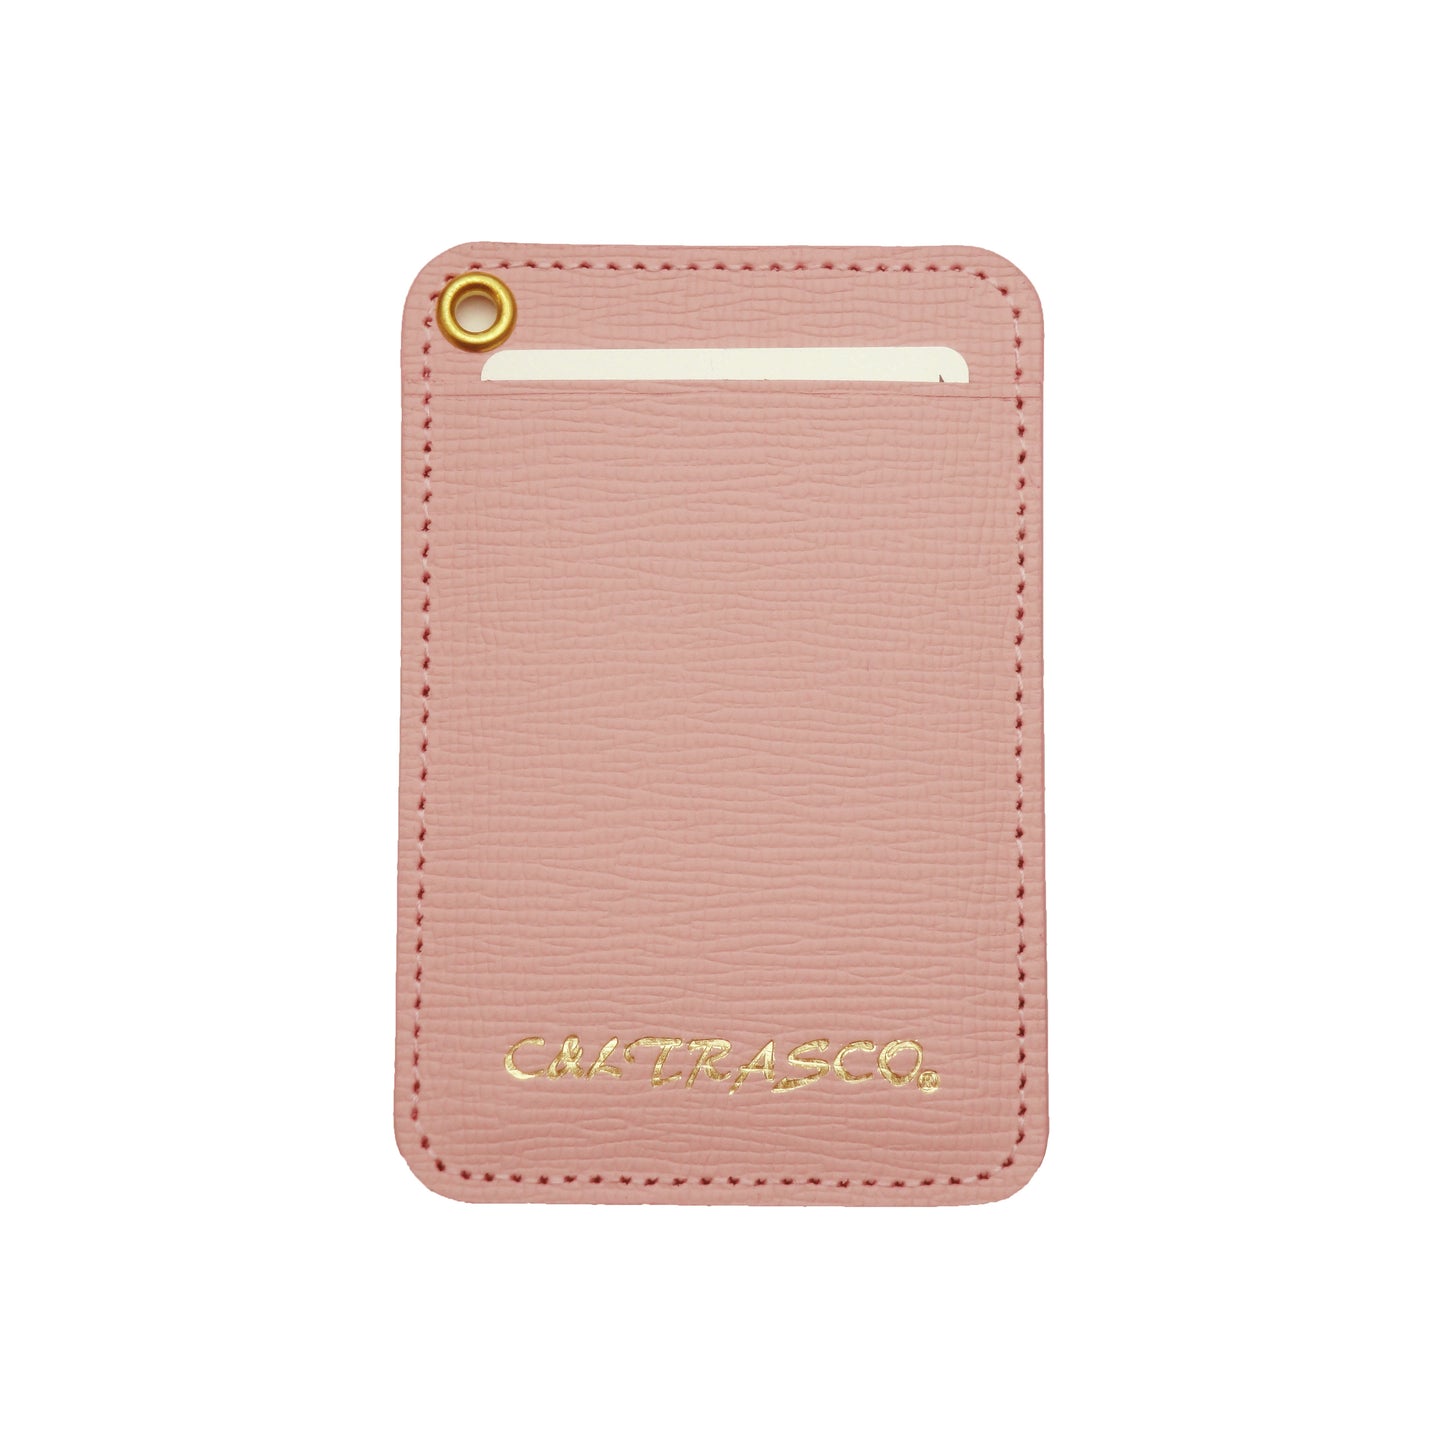 Pass case Regular case Leather Genuine leather Card case [Style-colors] Ladies cute pastel colors All 3 colors